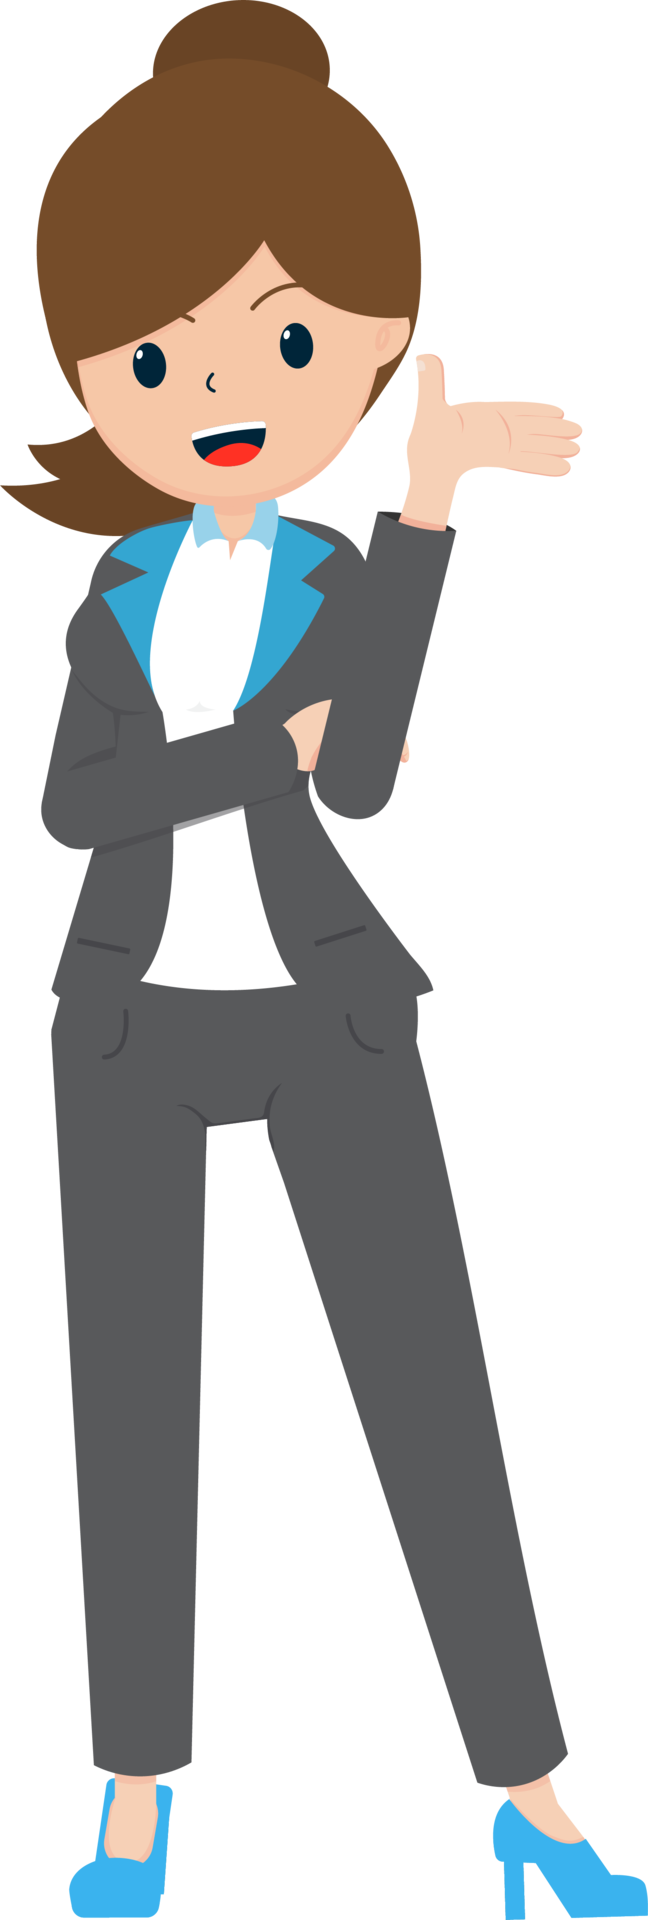 Salary Man Business Isolated Person People Cartoon Character Flat  illustration Png 25347369 PNG